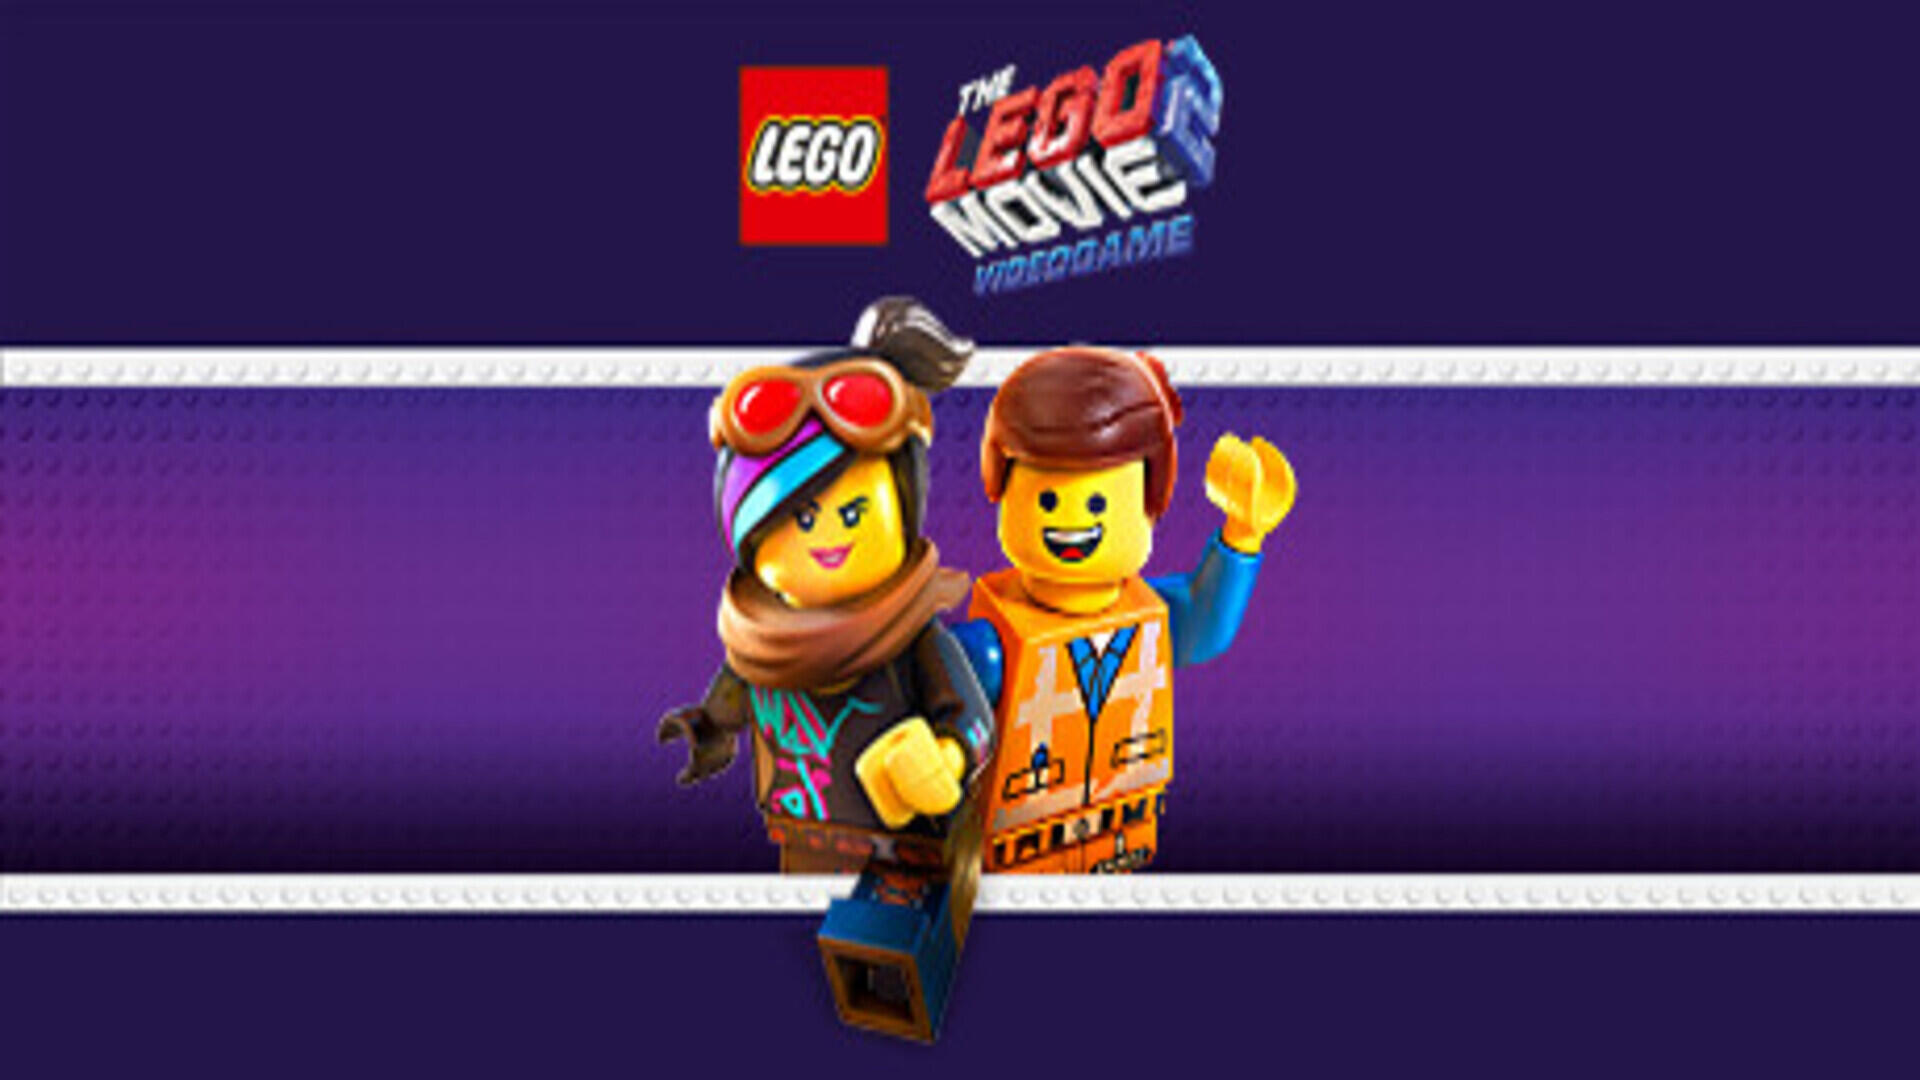 The LEGO Movie 2 Videogame – Free Download (Build 3992274)